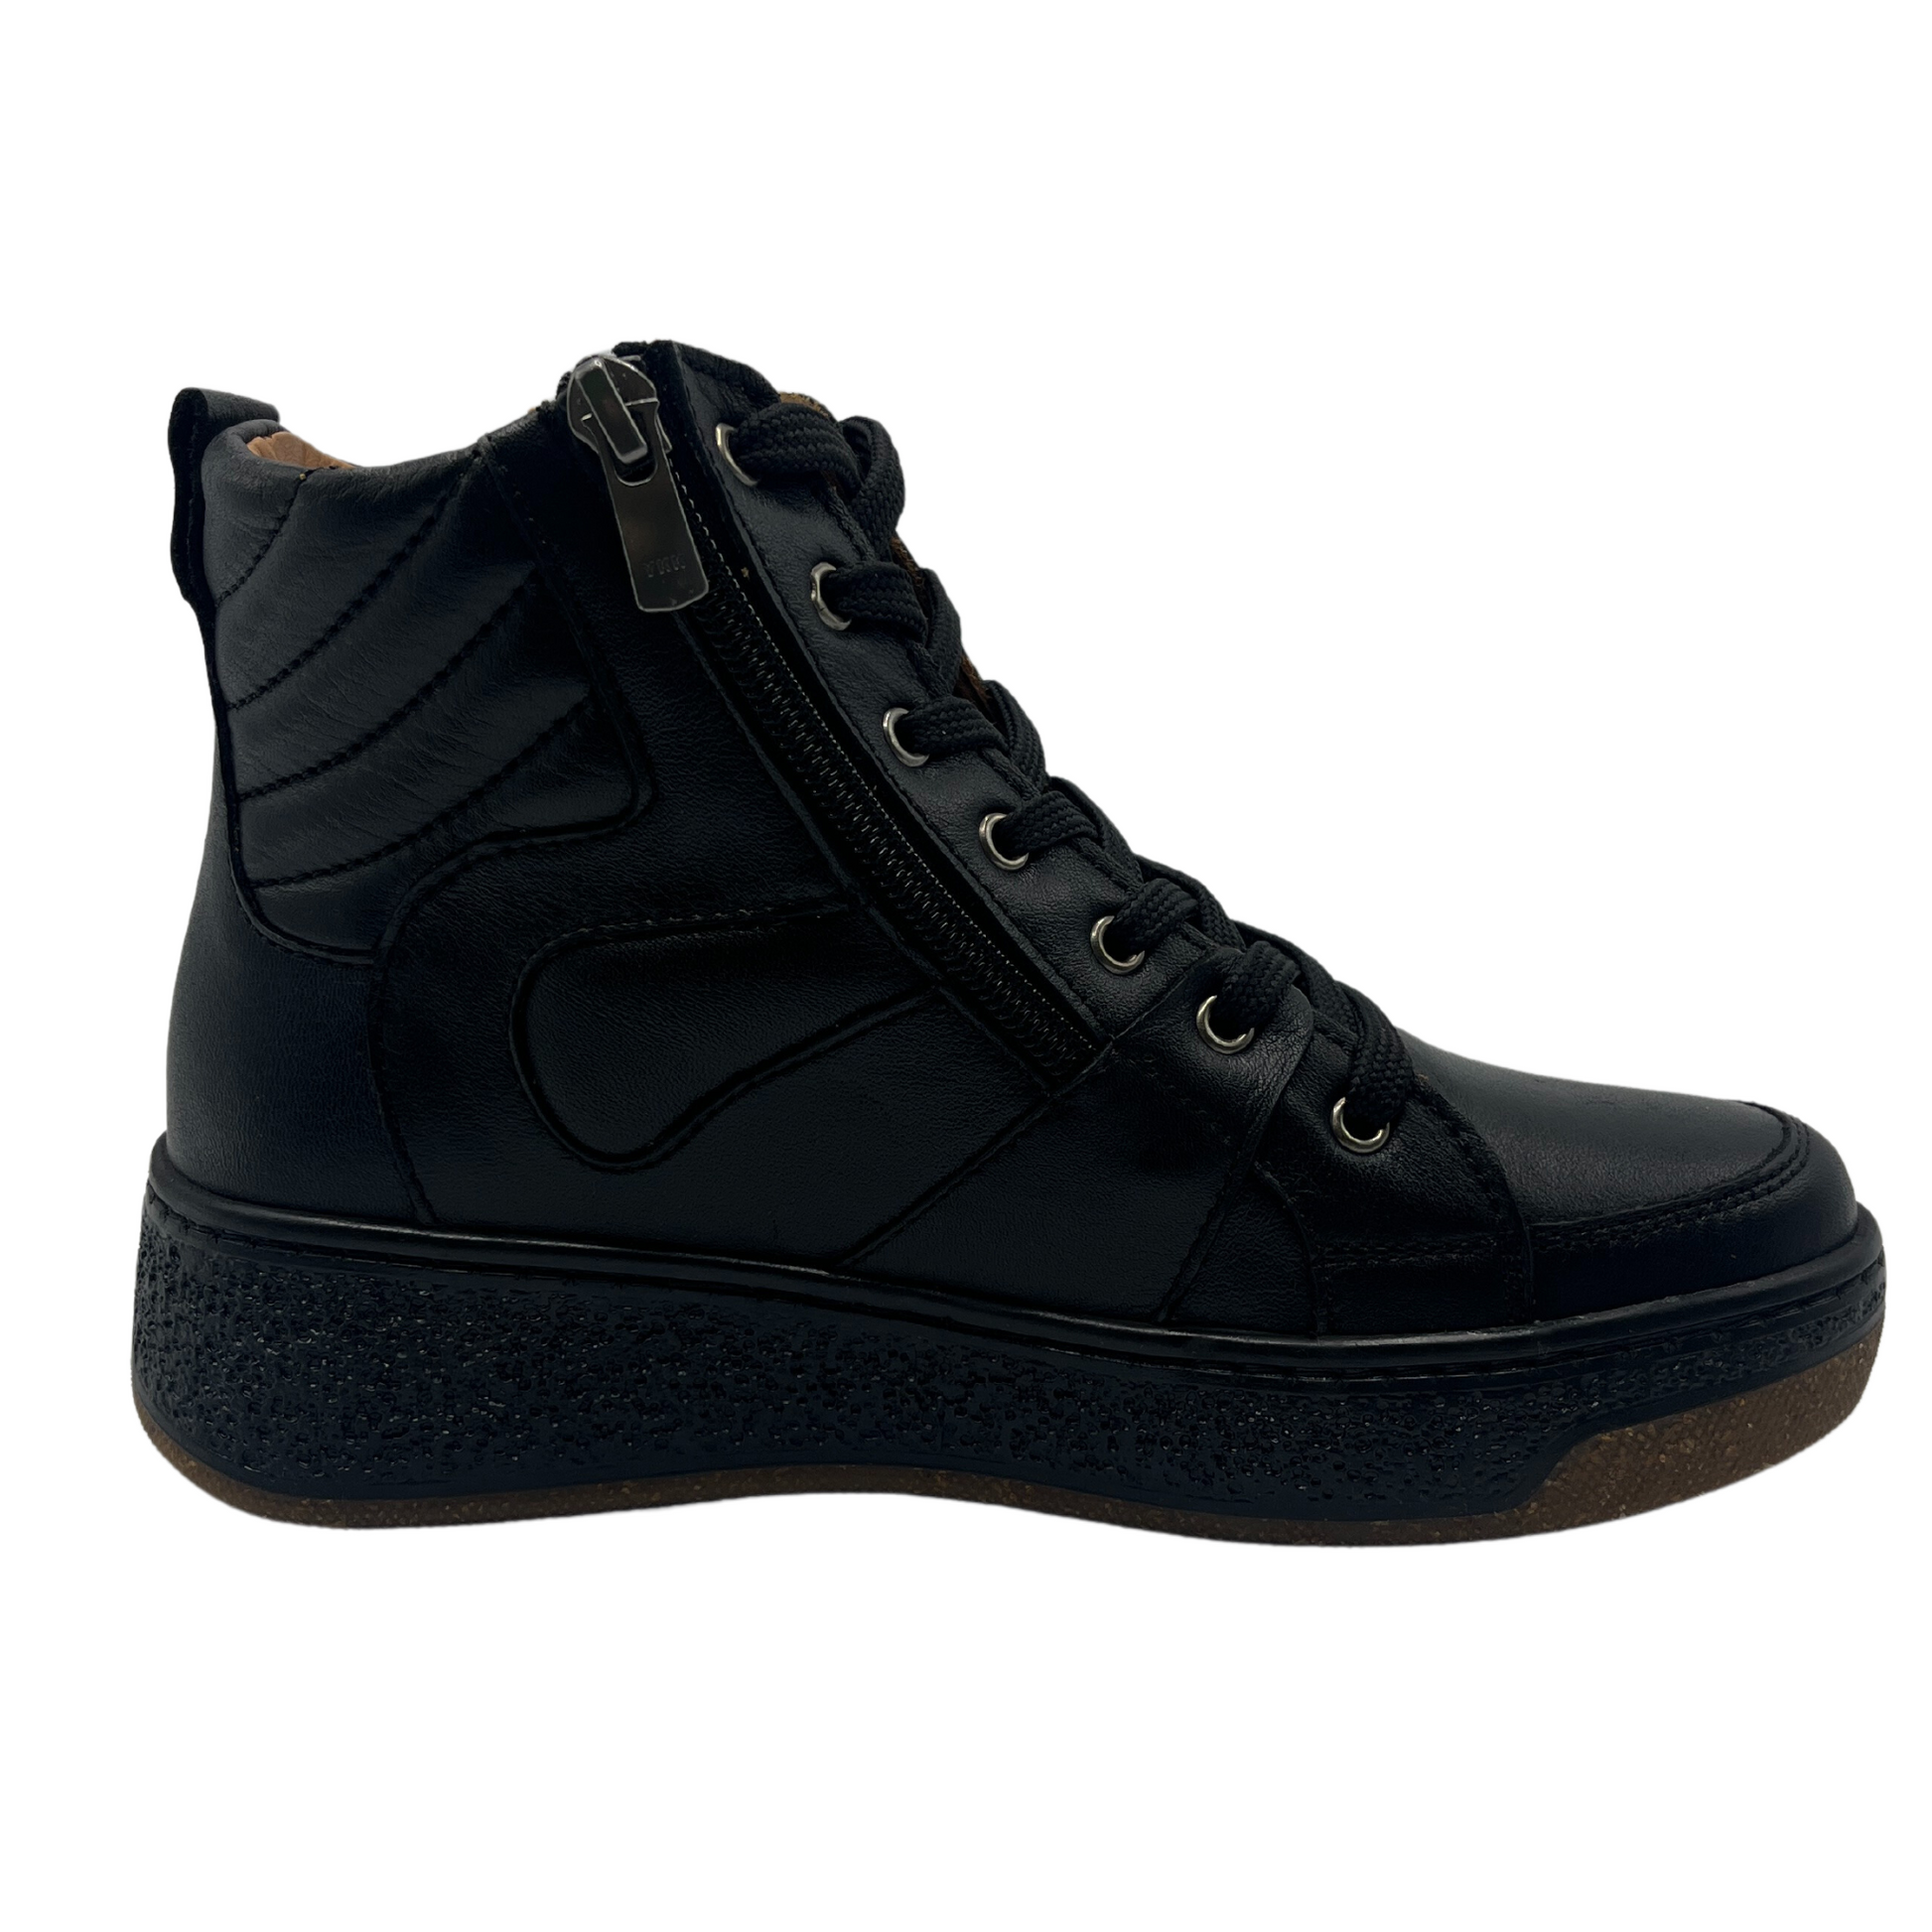 Right view of black leather short boot with wedge rubber sole and black laces